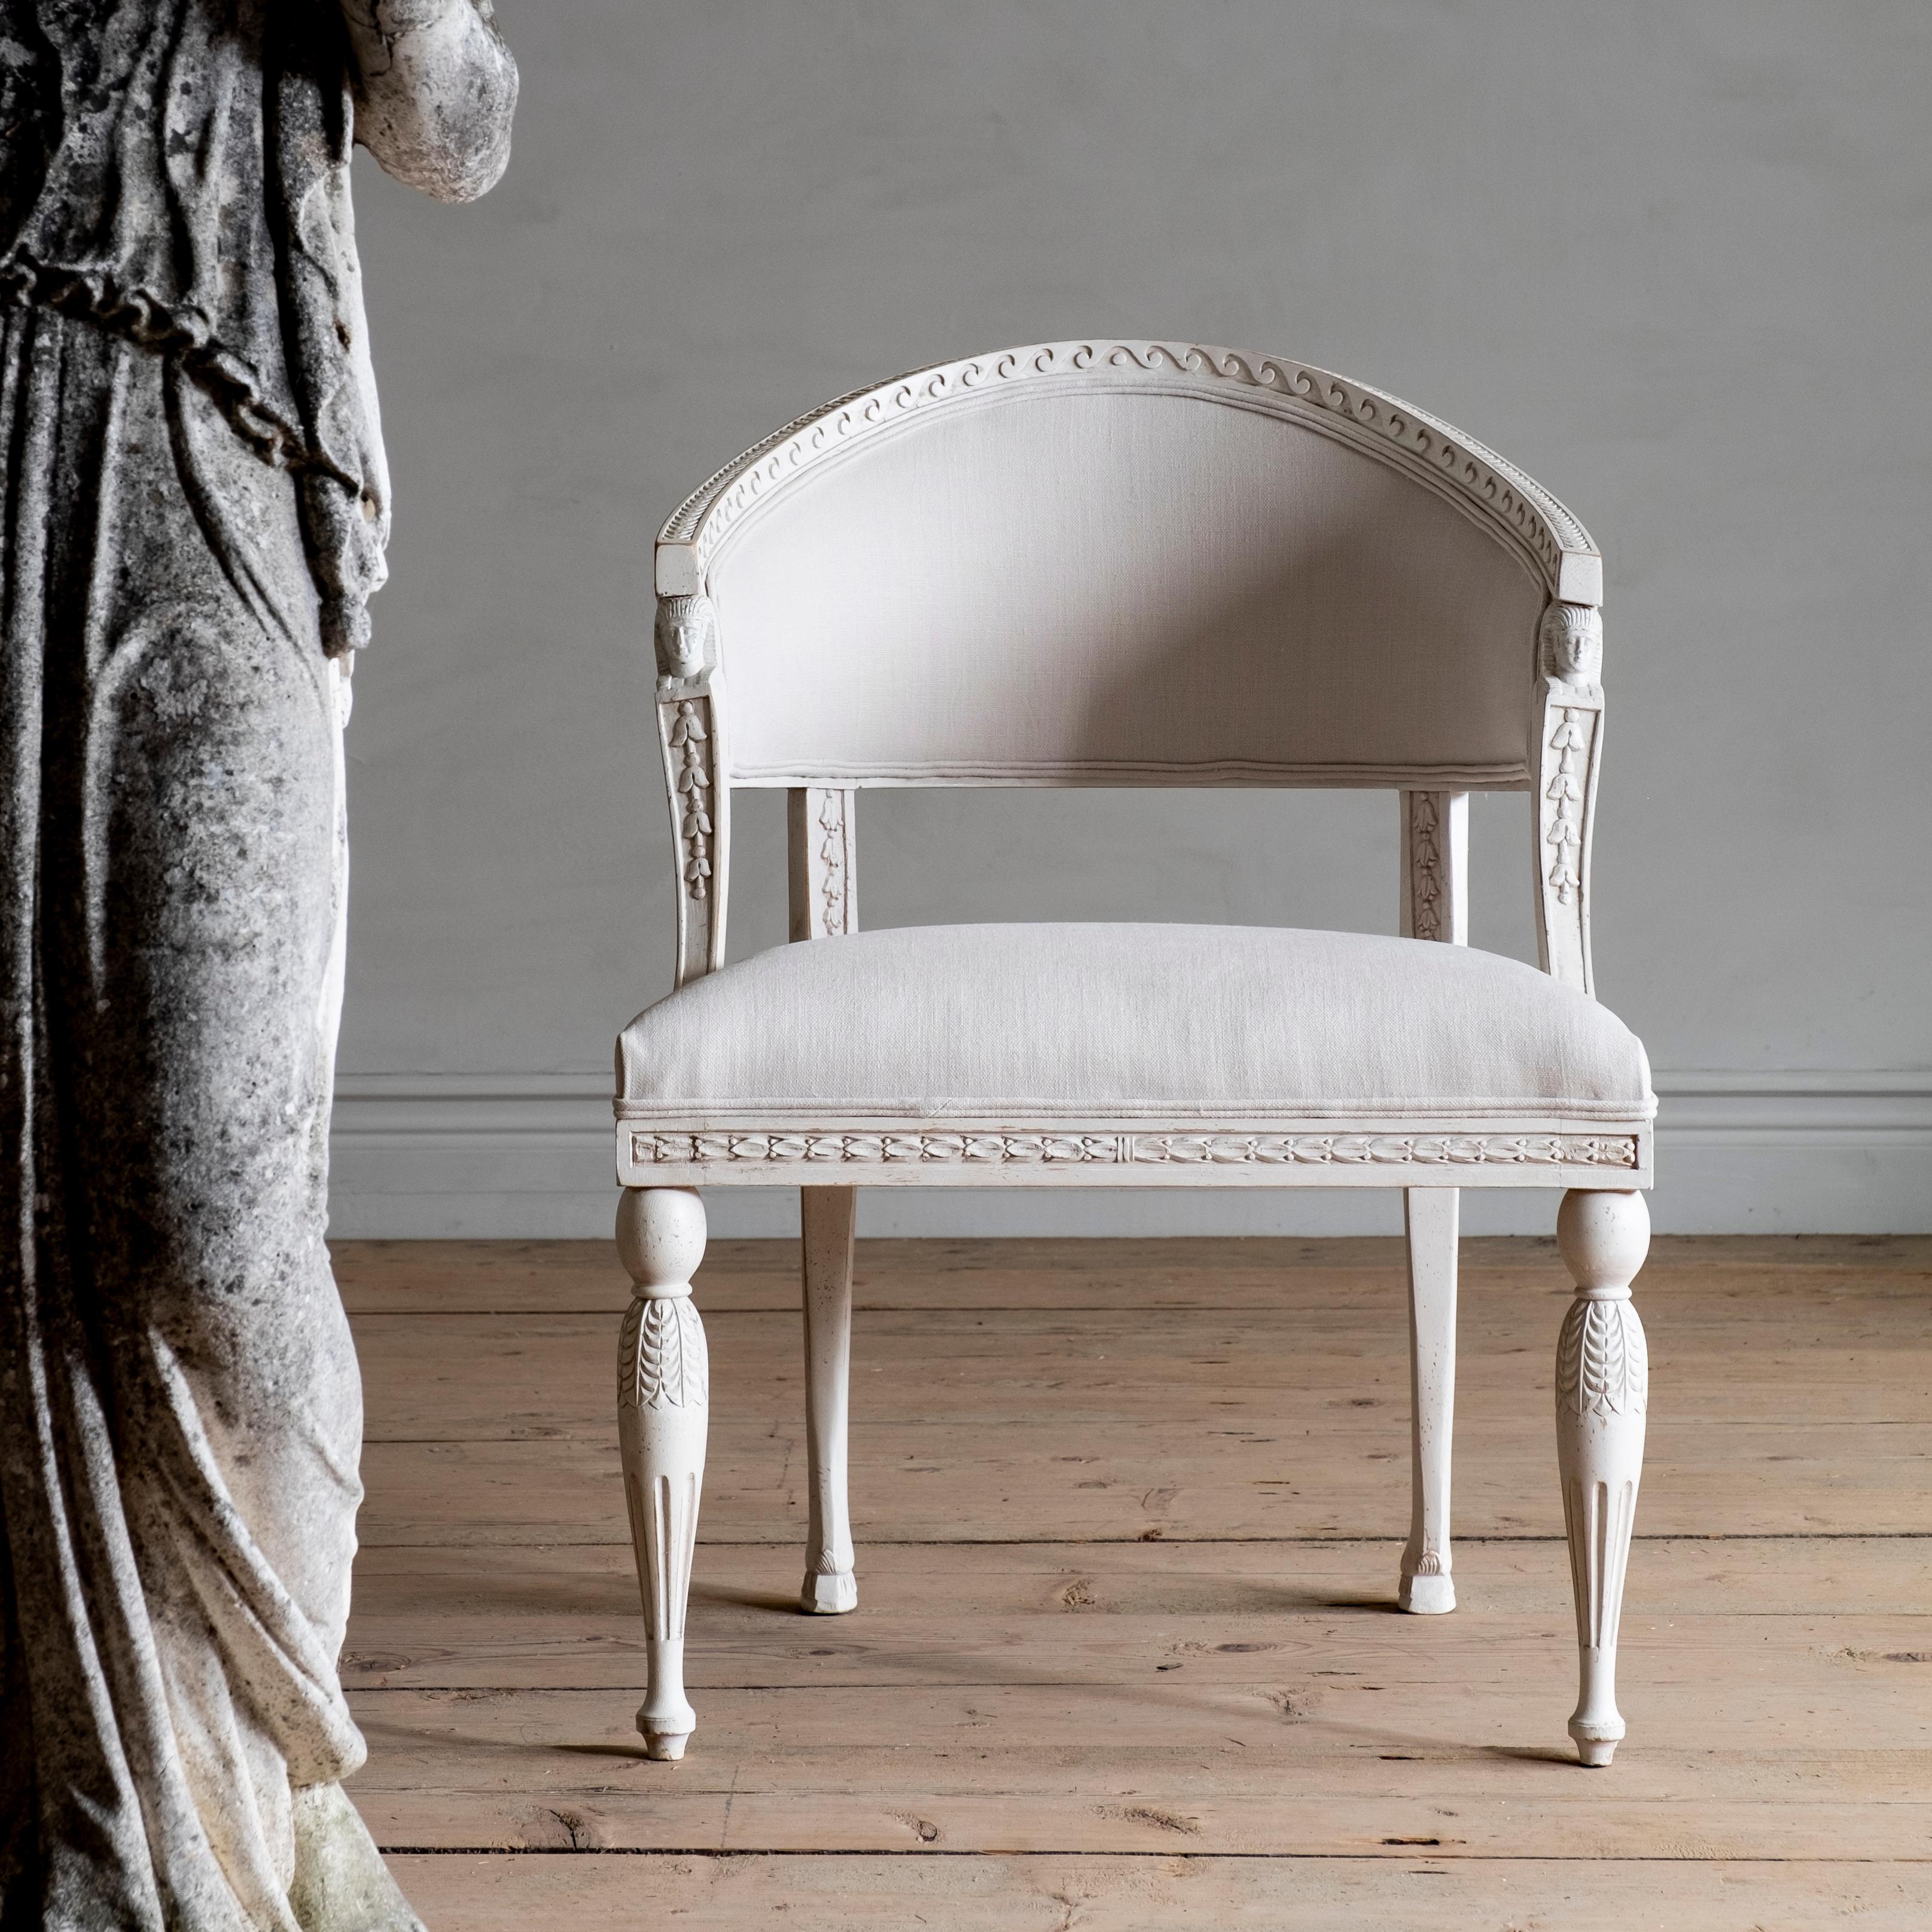 Limited edition reproductions by D. Larsson, inspired by the finest 18th - 19th-century Swedish furniture.

HAGA, a fine reproduction Gustavian barrel back armchair is influenced by a Gustavian armchair from our private collection that is attributed